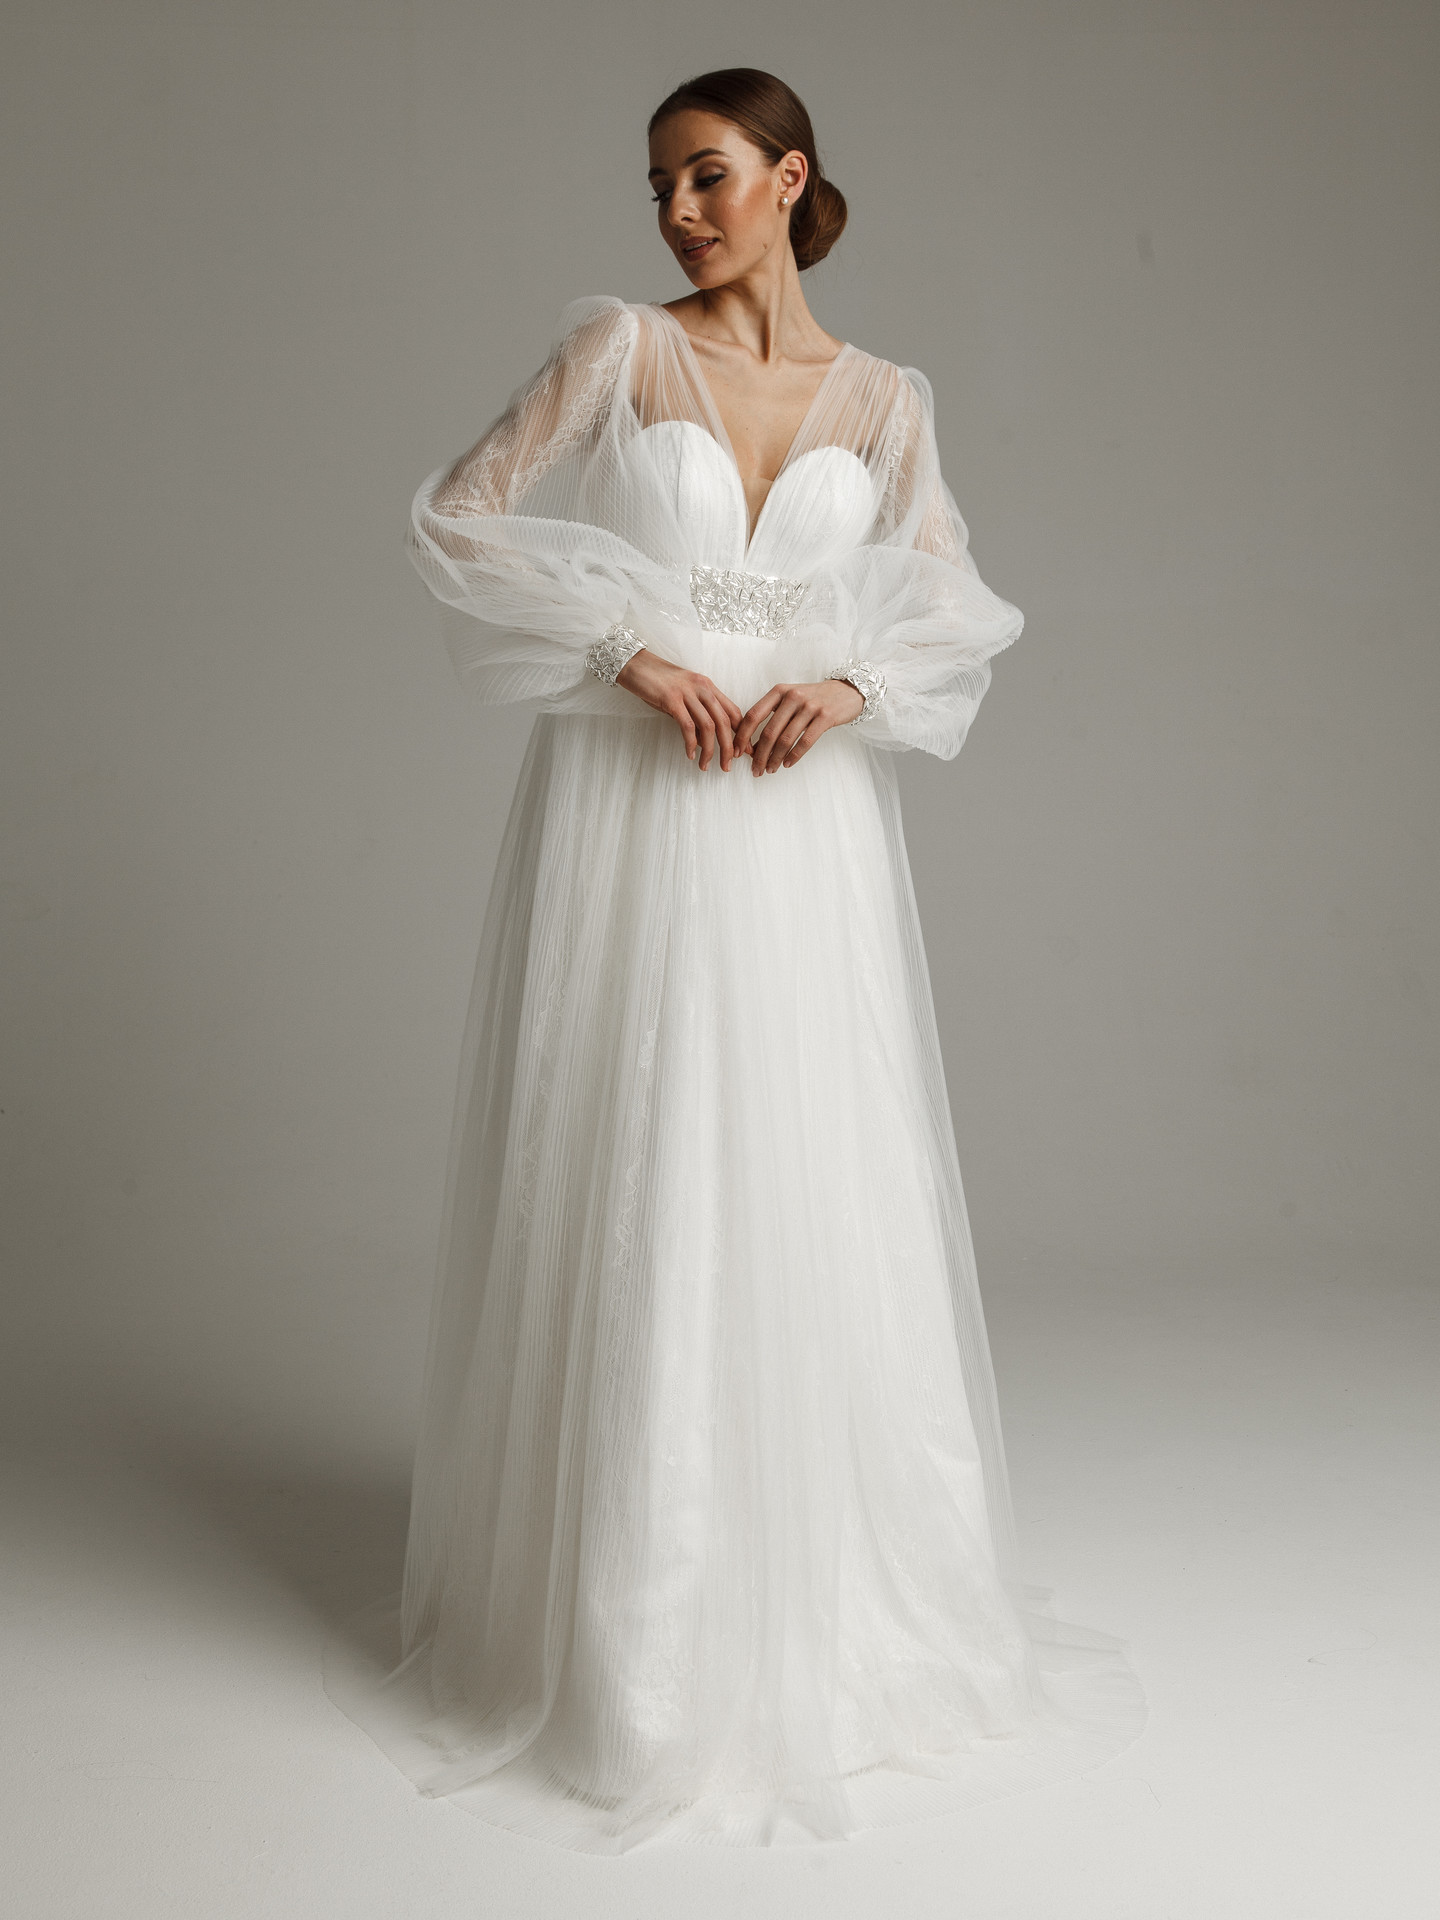 Loret gown, 2021, couture, dress, bridal, off-white, lace, A-line, embroidery, sleeves, archive